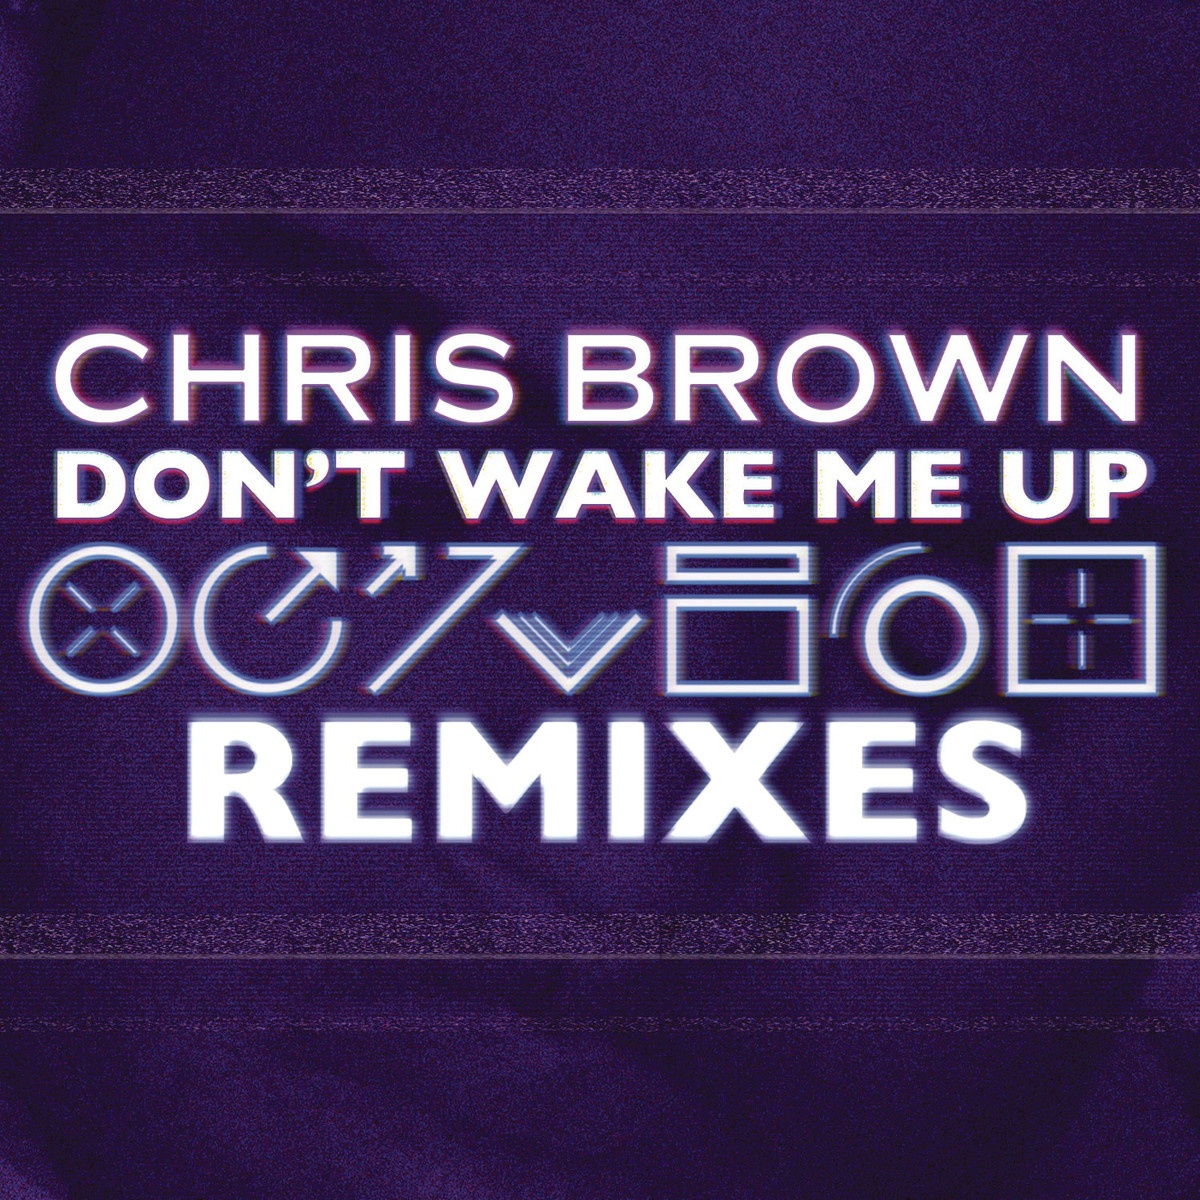 Don't Wake Me Up - Clinton Sparks Remix